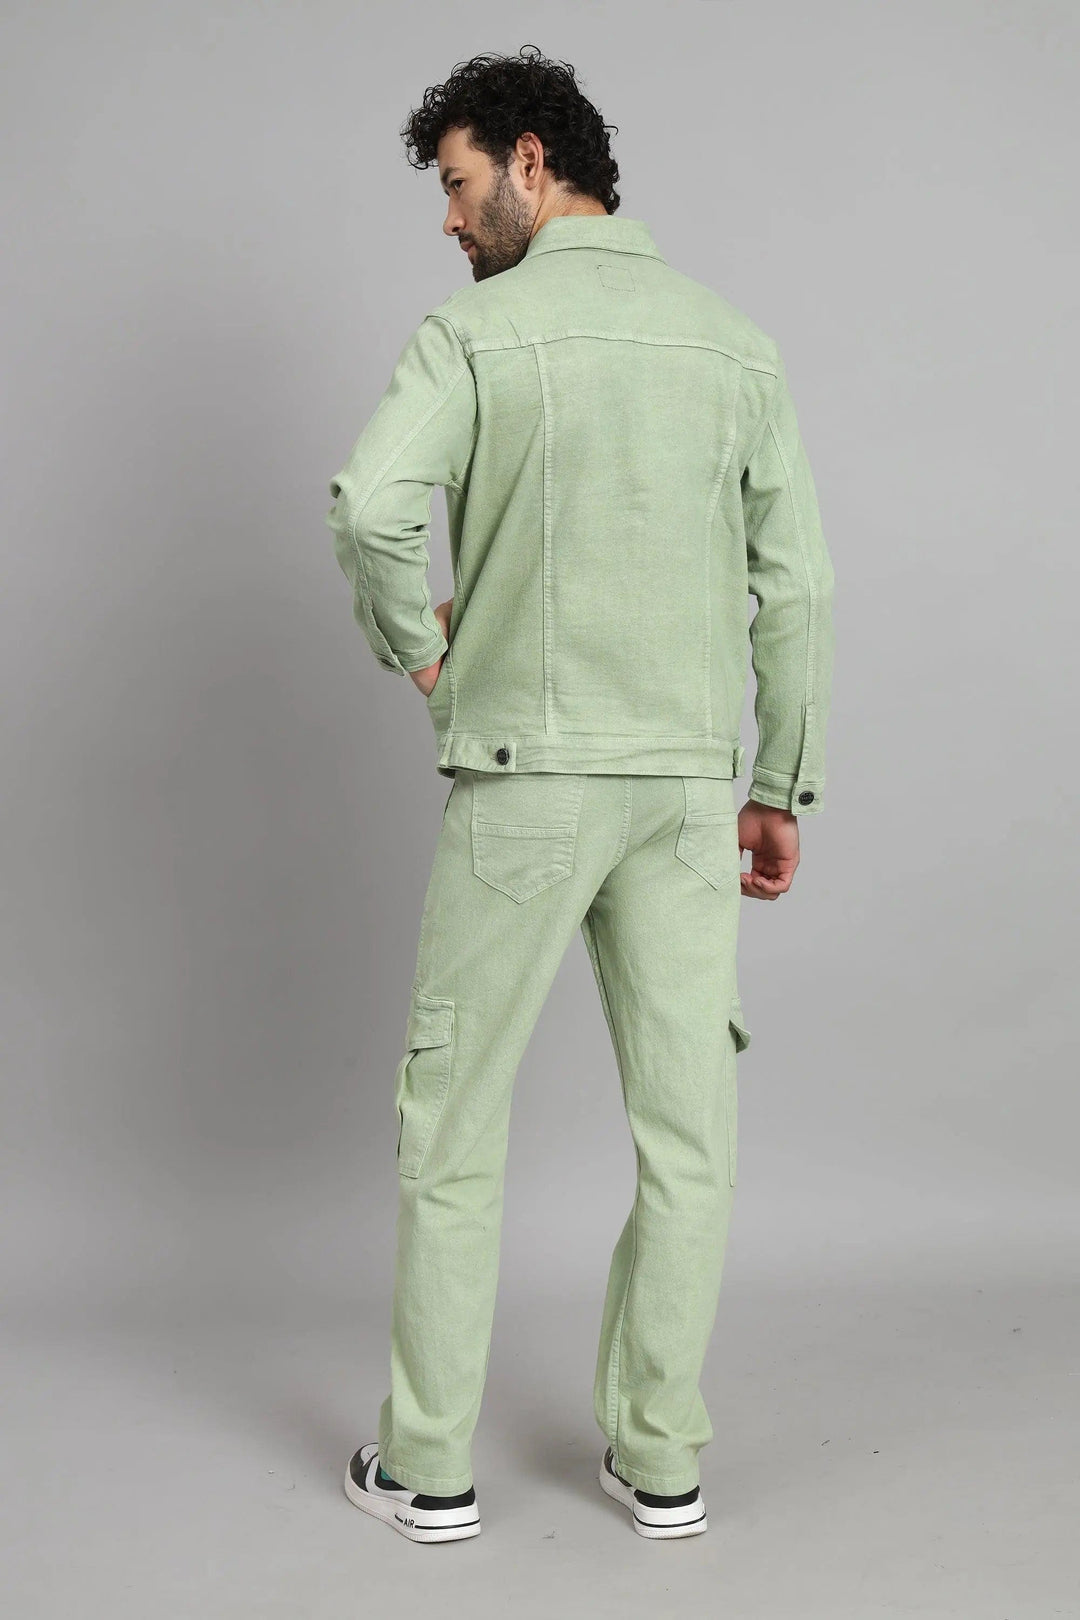 Relaxed Fit Ankle Length Pista Trouser